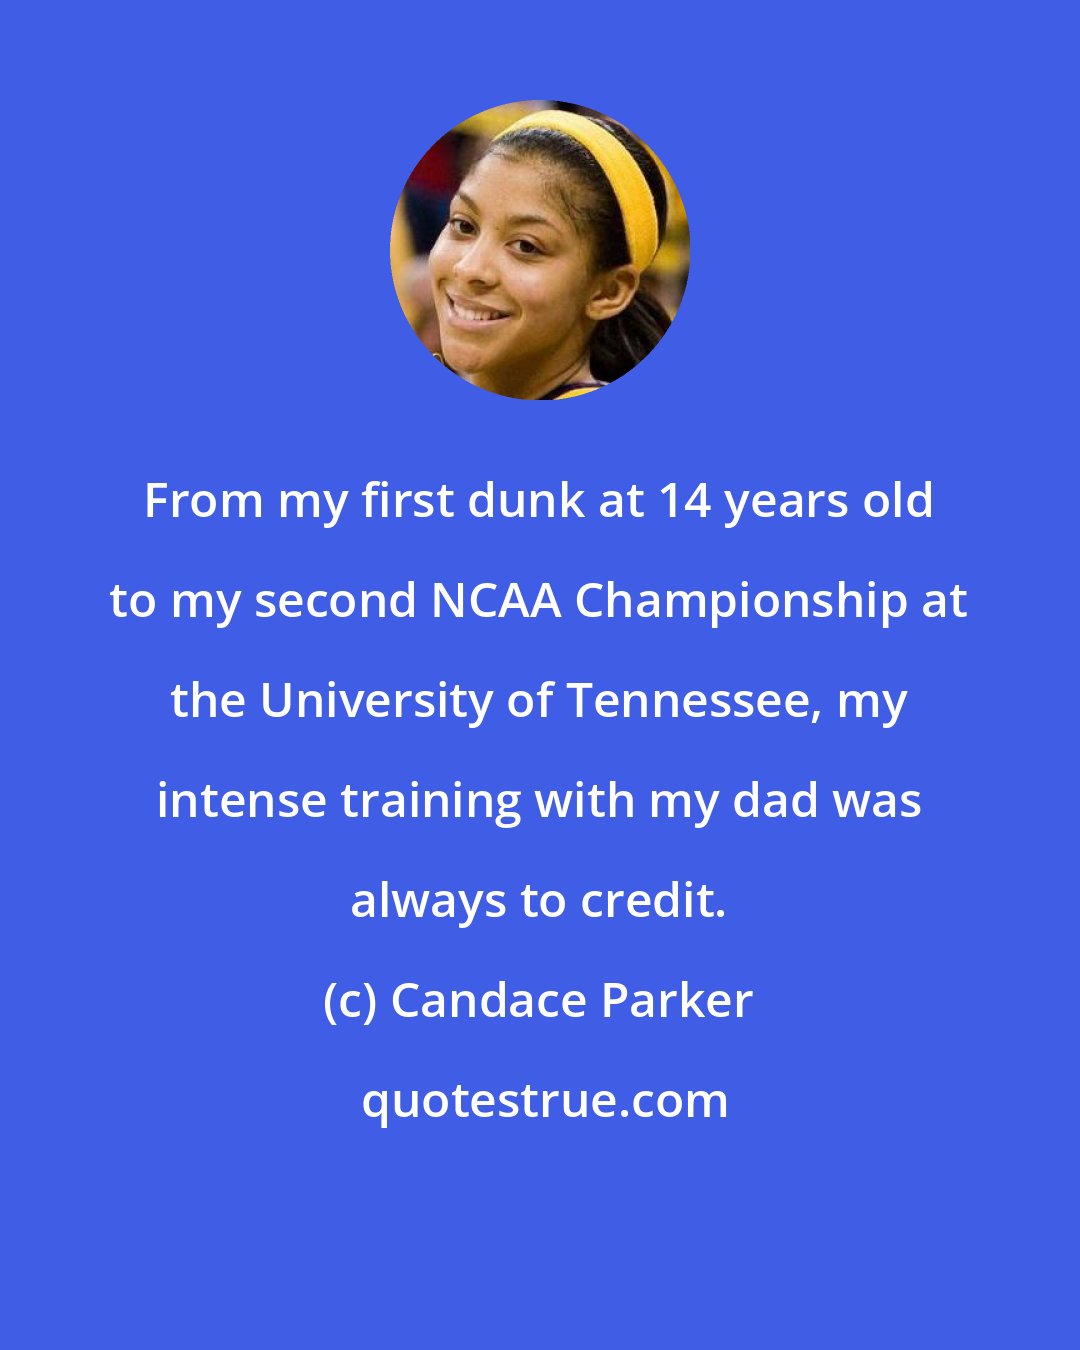 Candace Parker: From my first dunk at 14 years old to my second NCAA Championship at the University of Tennessee, my intense training with my dad was always to credit.